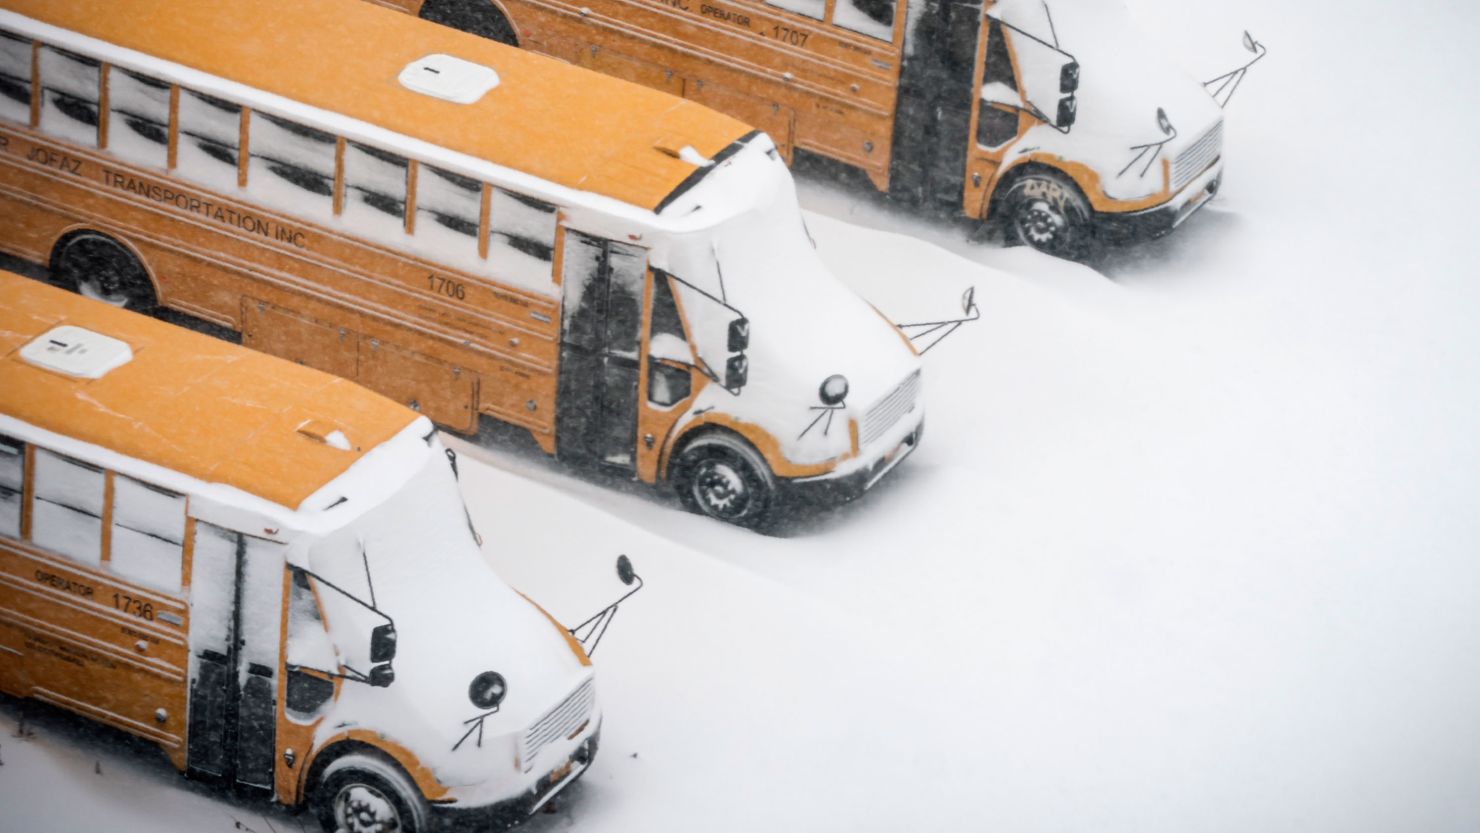 School buses covered in snow during a snowstorm in Brooklyn, New York.